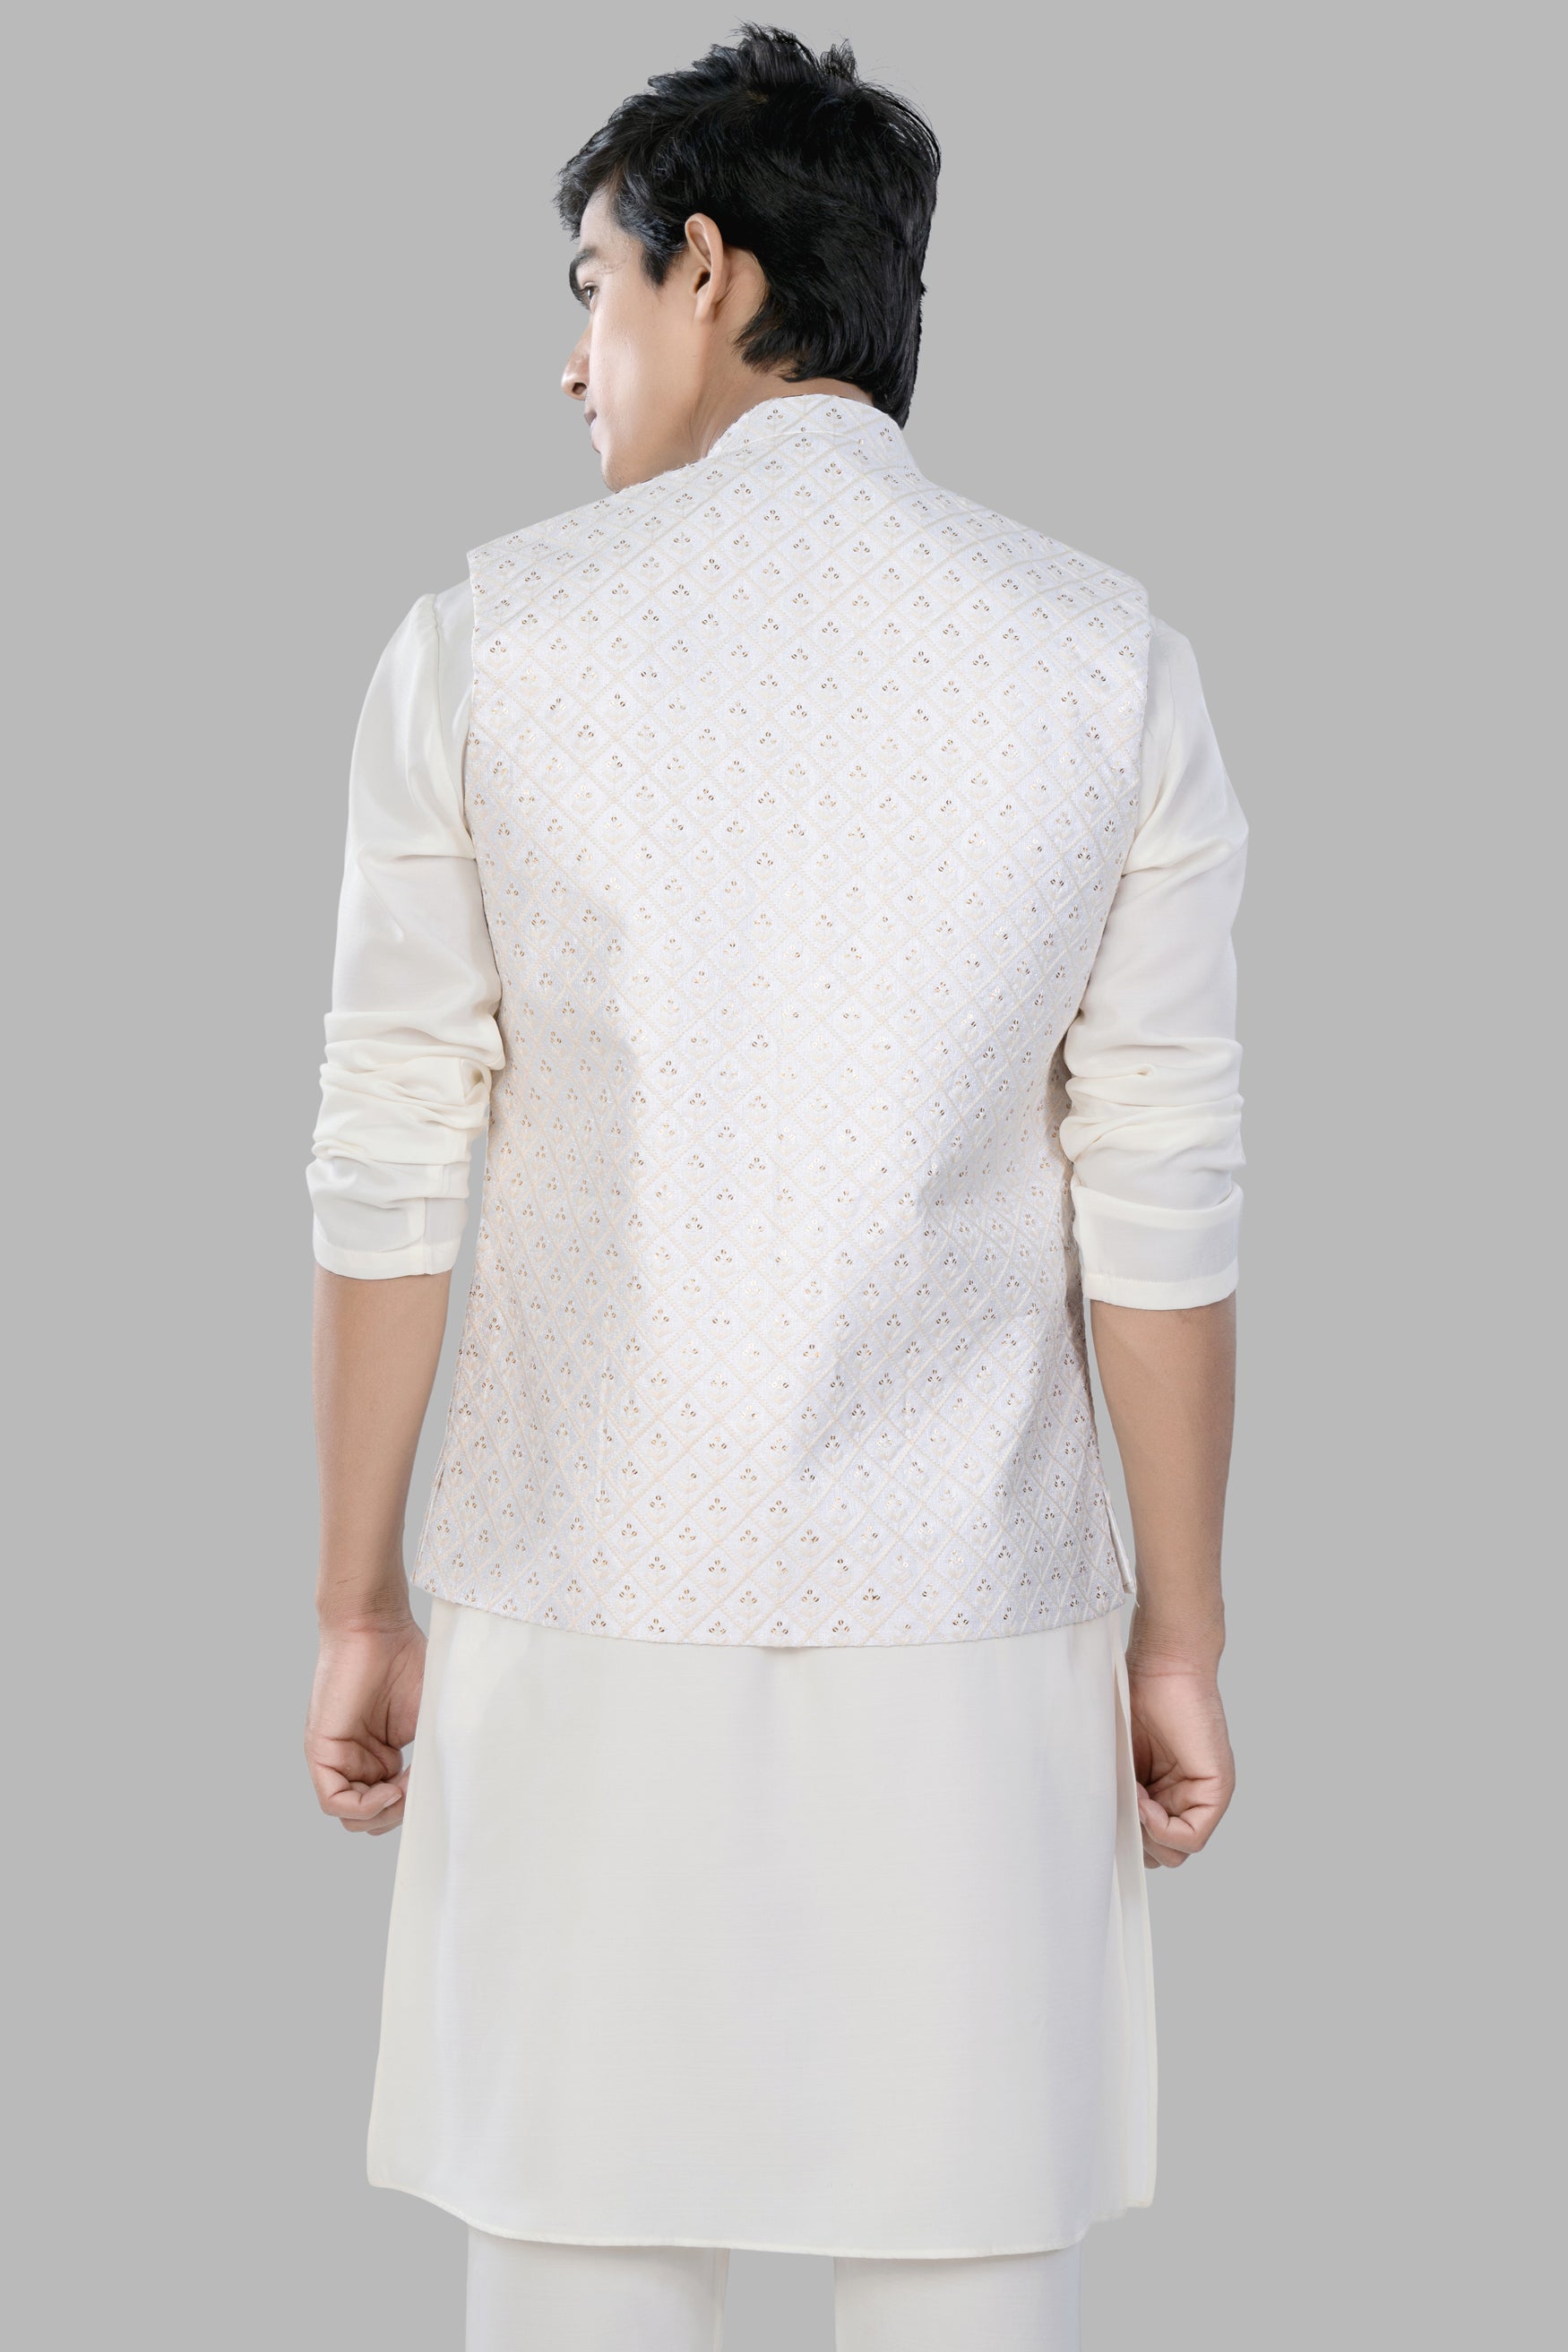 Party Wear Binani Mens White Kurta Pajama With Jacket, Machine and Hand  wash, Size: S-XXL at Rs 855/set in Indore